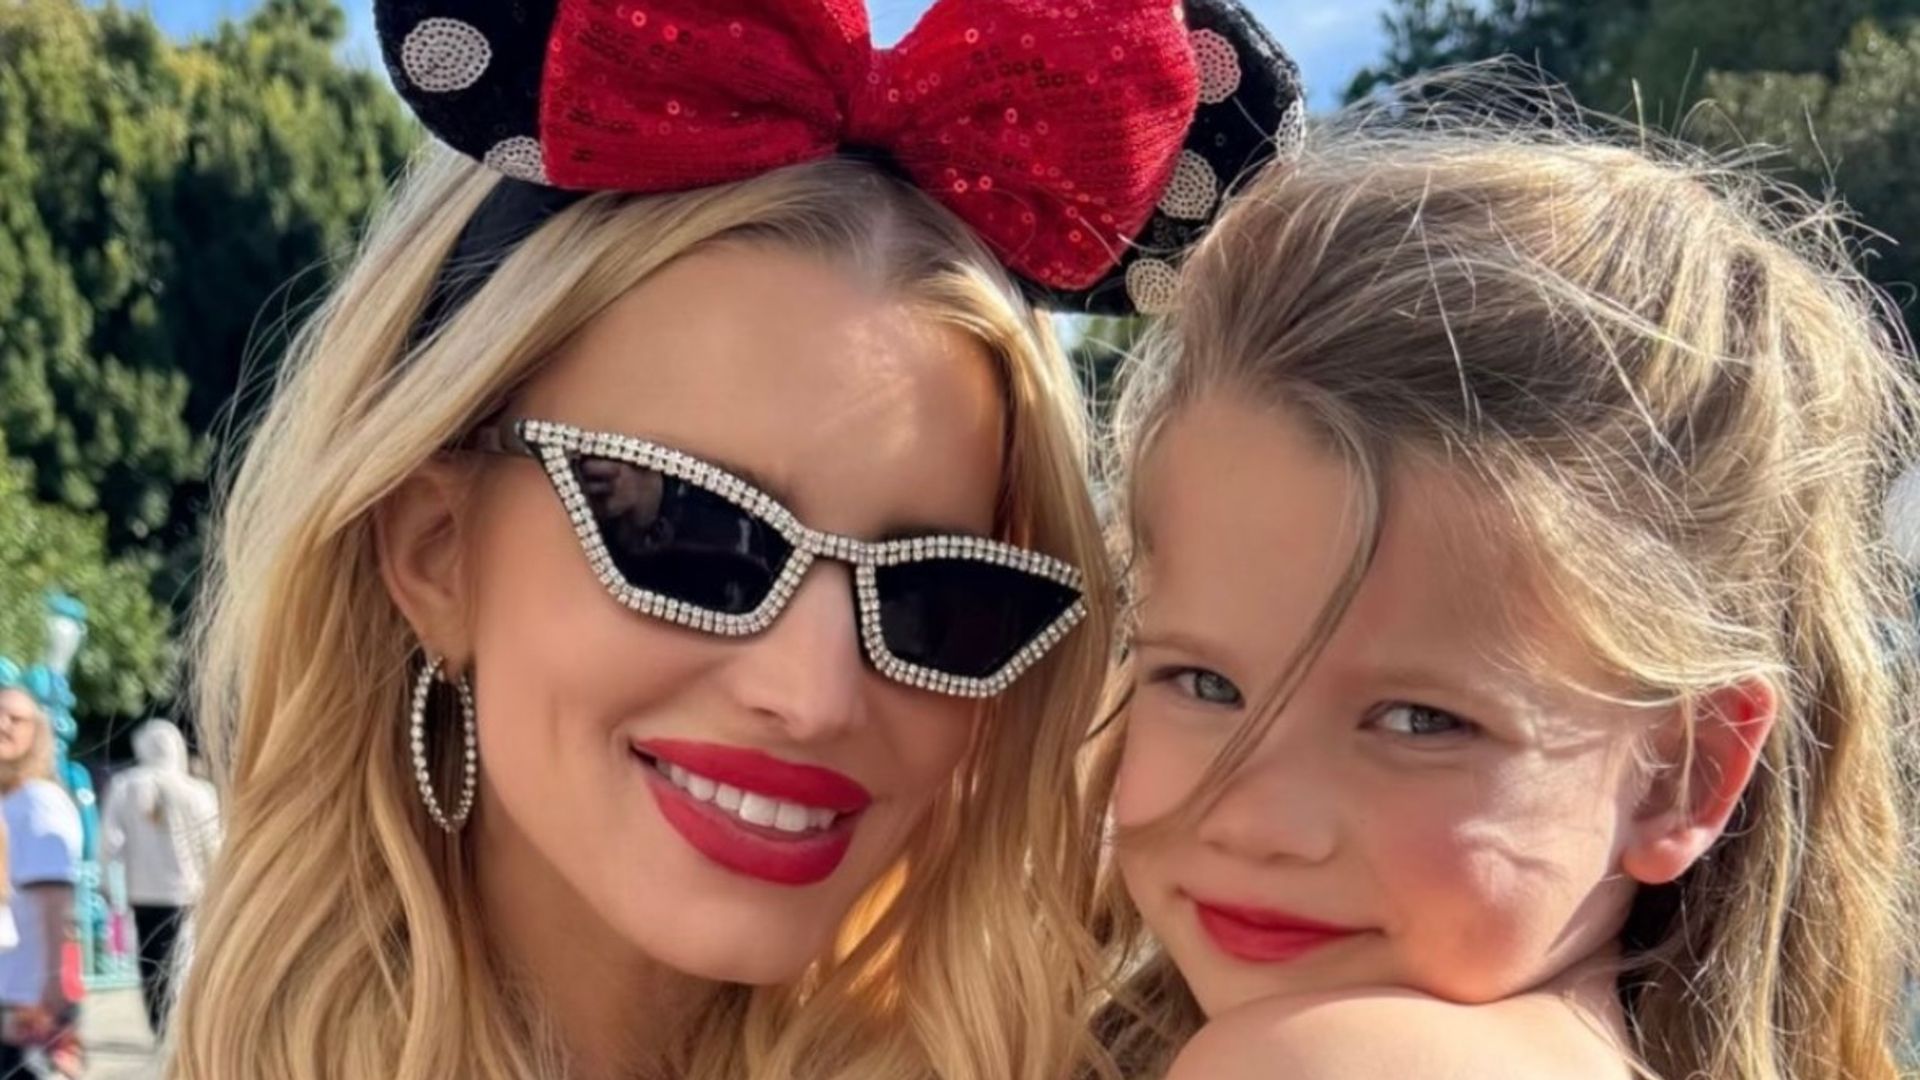 Jessica Simpson's youngest daughter is her twin in adorable new family photos from 5th birthday celebrations